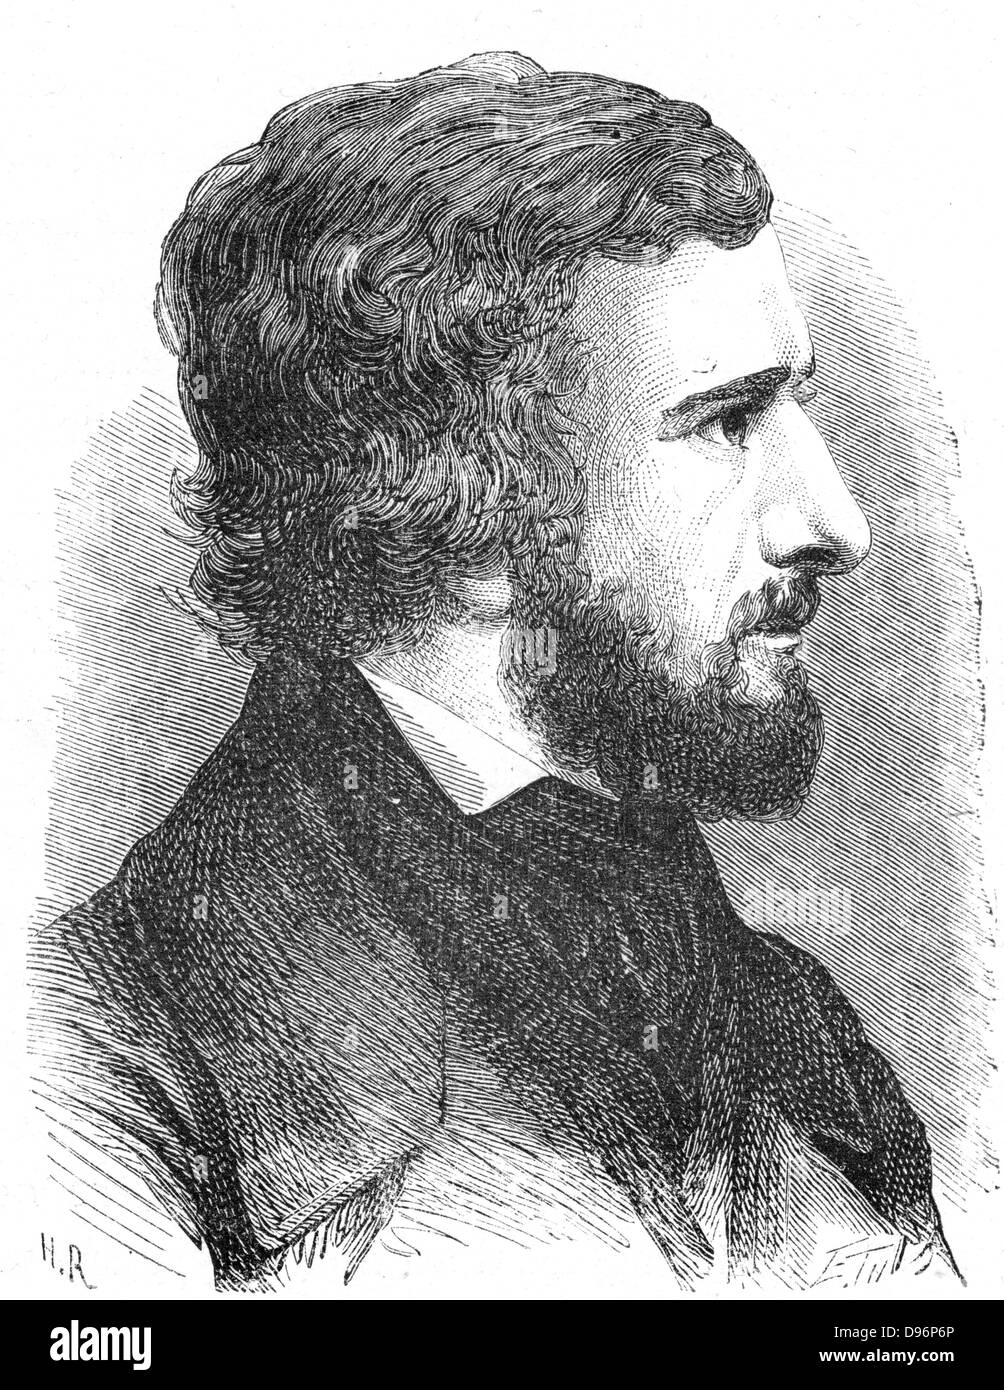 Hippolyte Fizeau (1819-1896) French physicist. Measured the velocity of light on the earth's surface (1849). Used Doppler principle to determine velocity of stars in line of sight. Confirmed the wave theory of light.  From 'Les Merveilles de la Science', Louis Figuier, (Paris, 1870). Engraving. Stock Photo